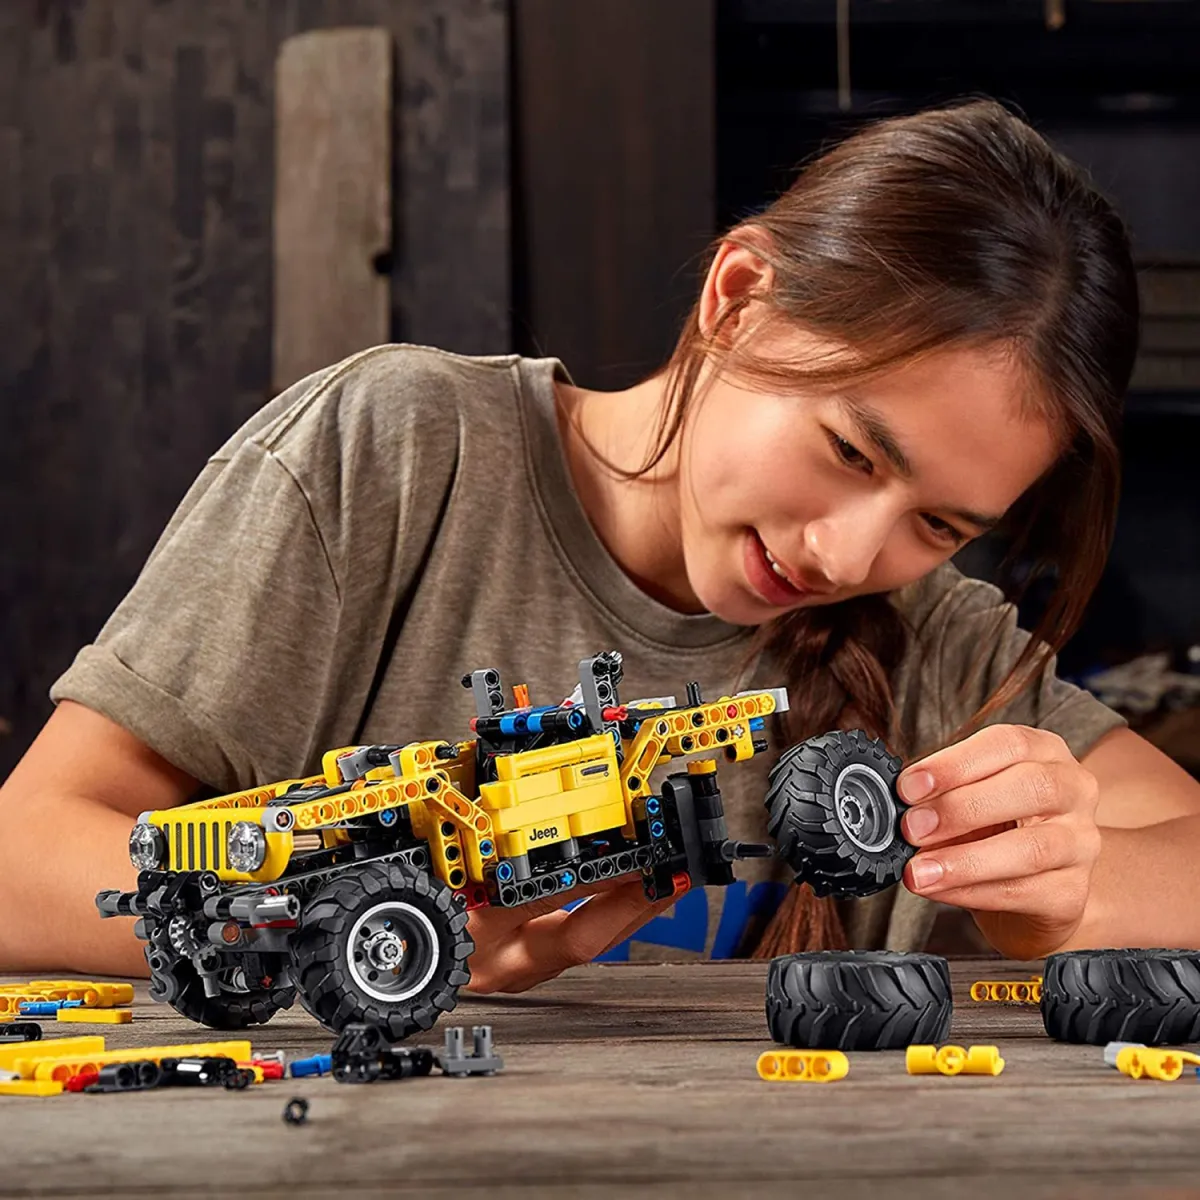 From Denmark】LEGO Technic Jeep Wrangler 42122; an attractive model building  set for kids who love high performance toy cars, new 2021 (665 pieces)  guaranteed genuine From Denmark 